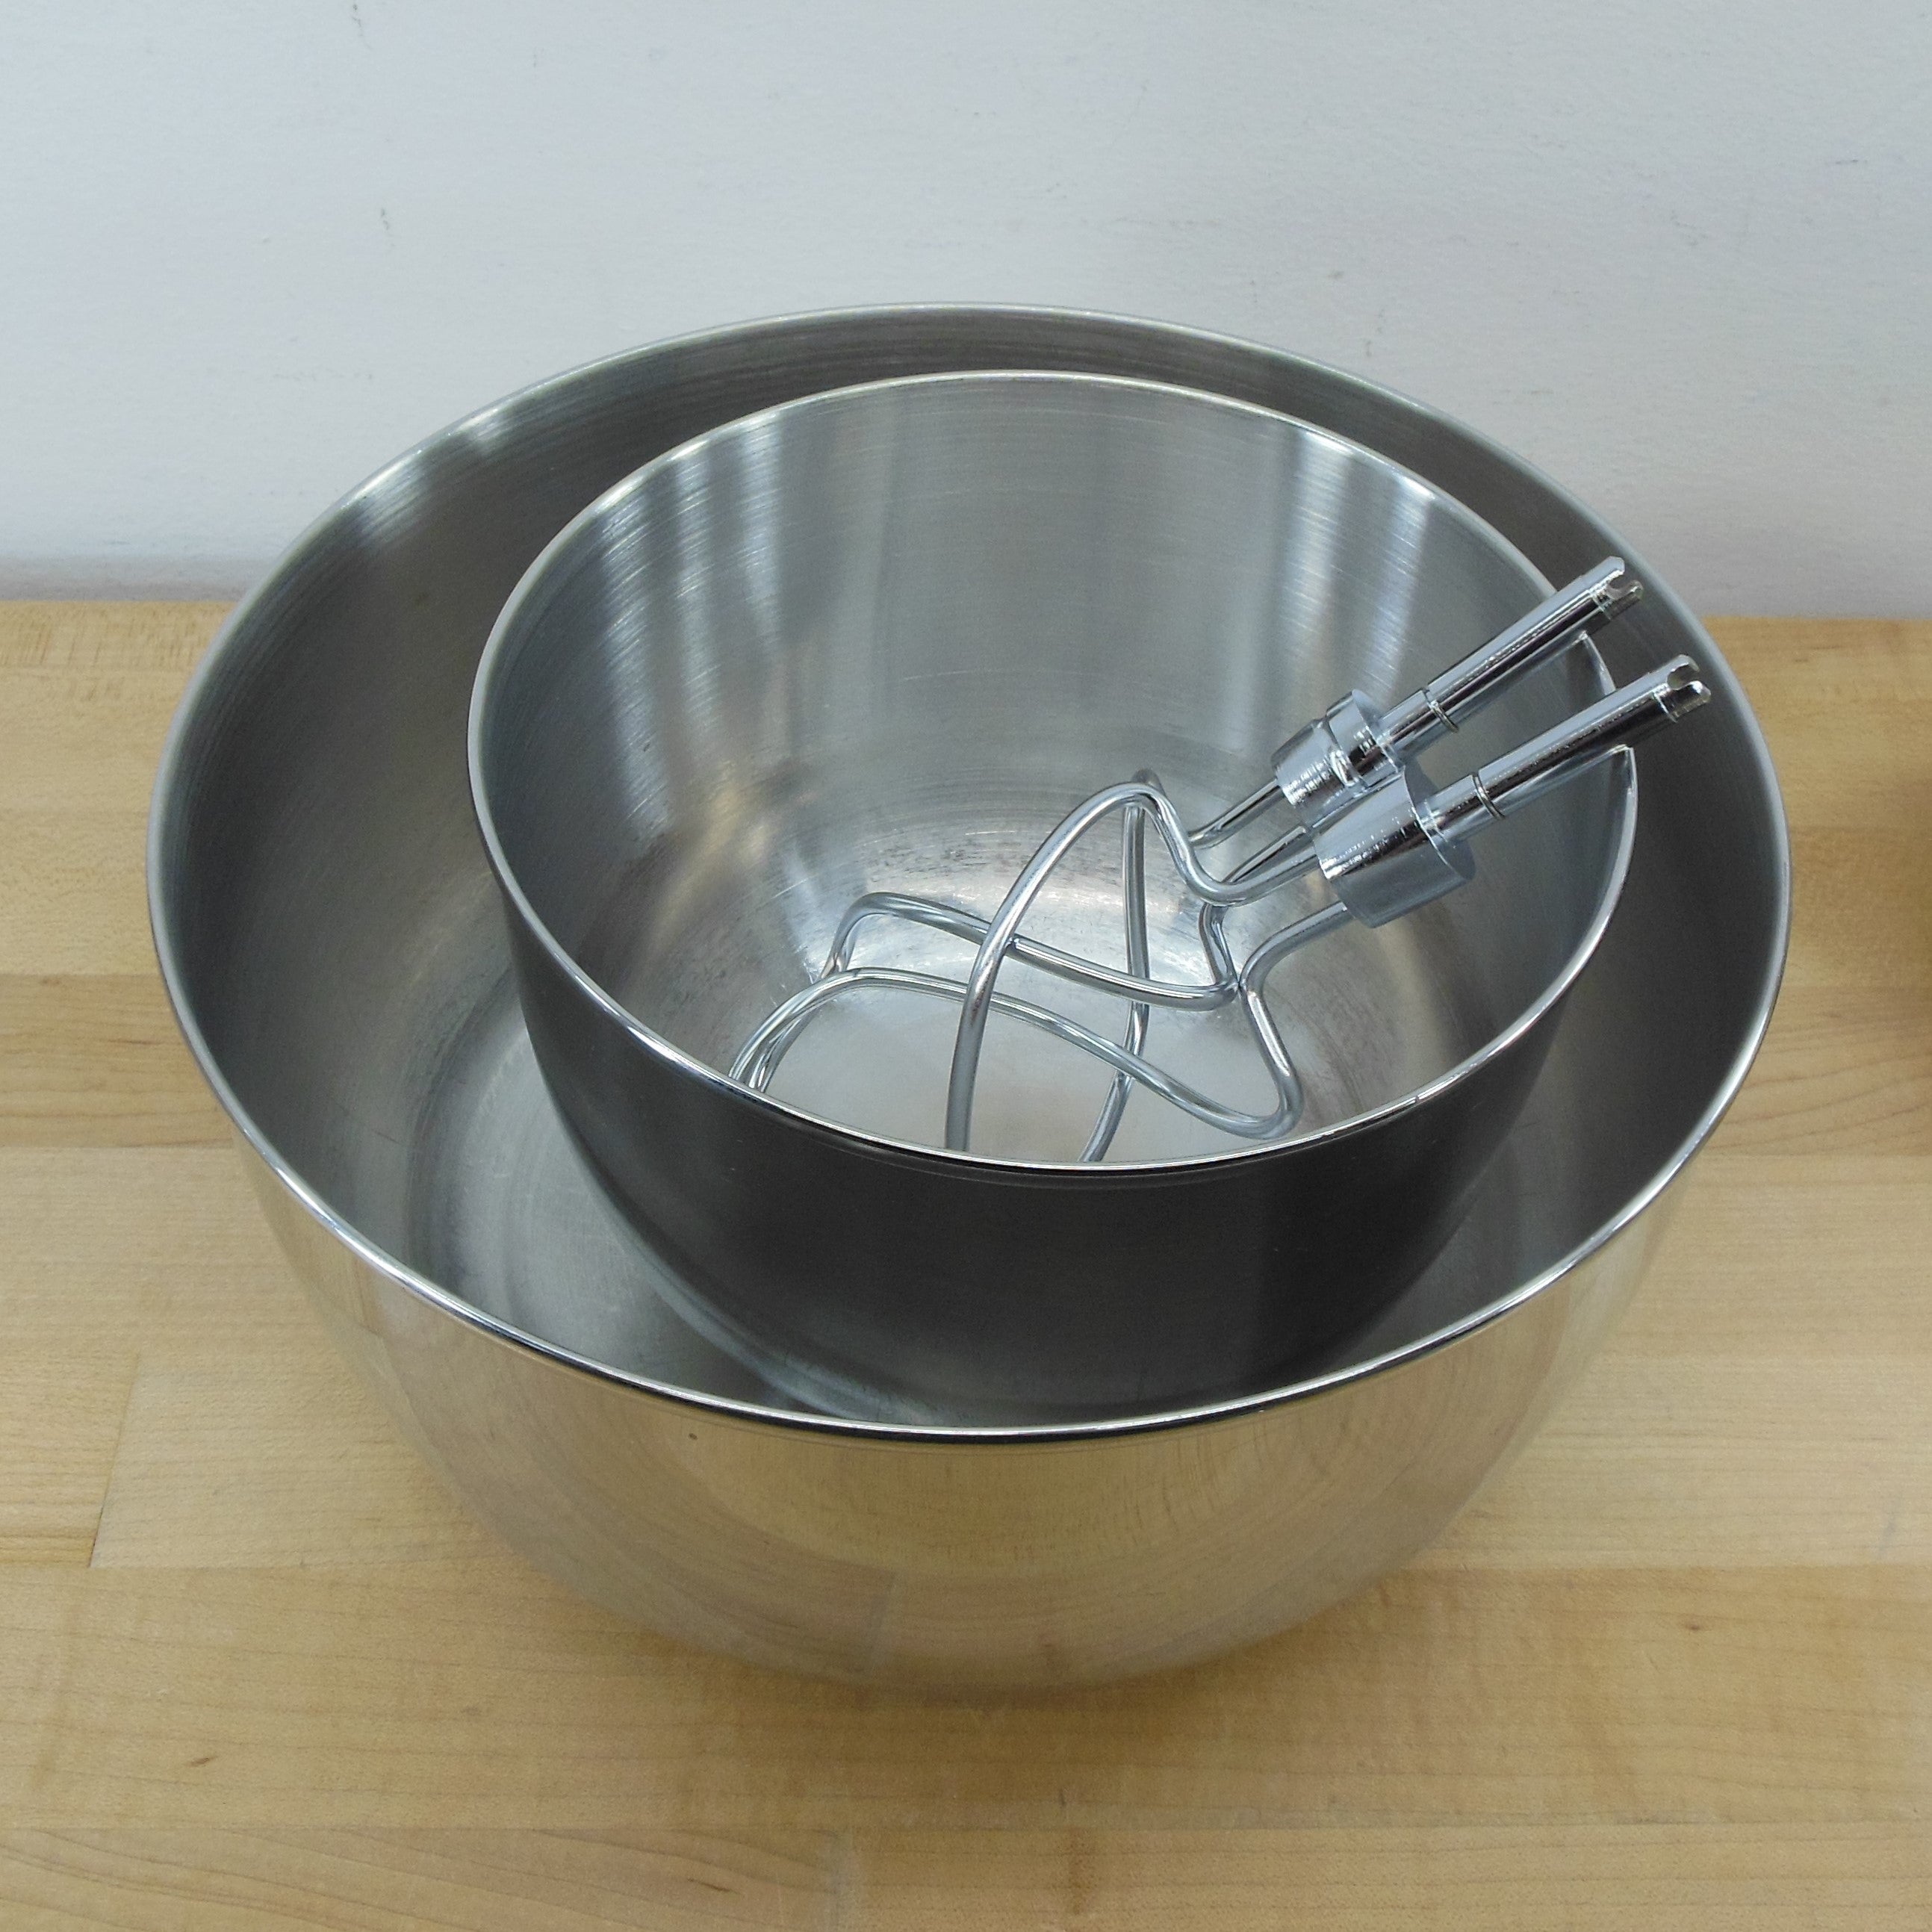 Sunbeam Oster Mixer Large Stainless Steel Mixing Bowl 22802